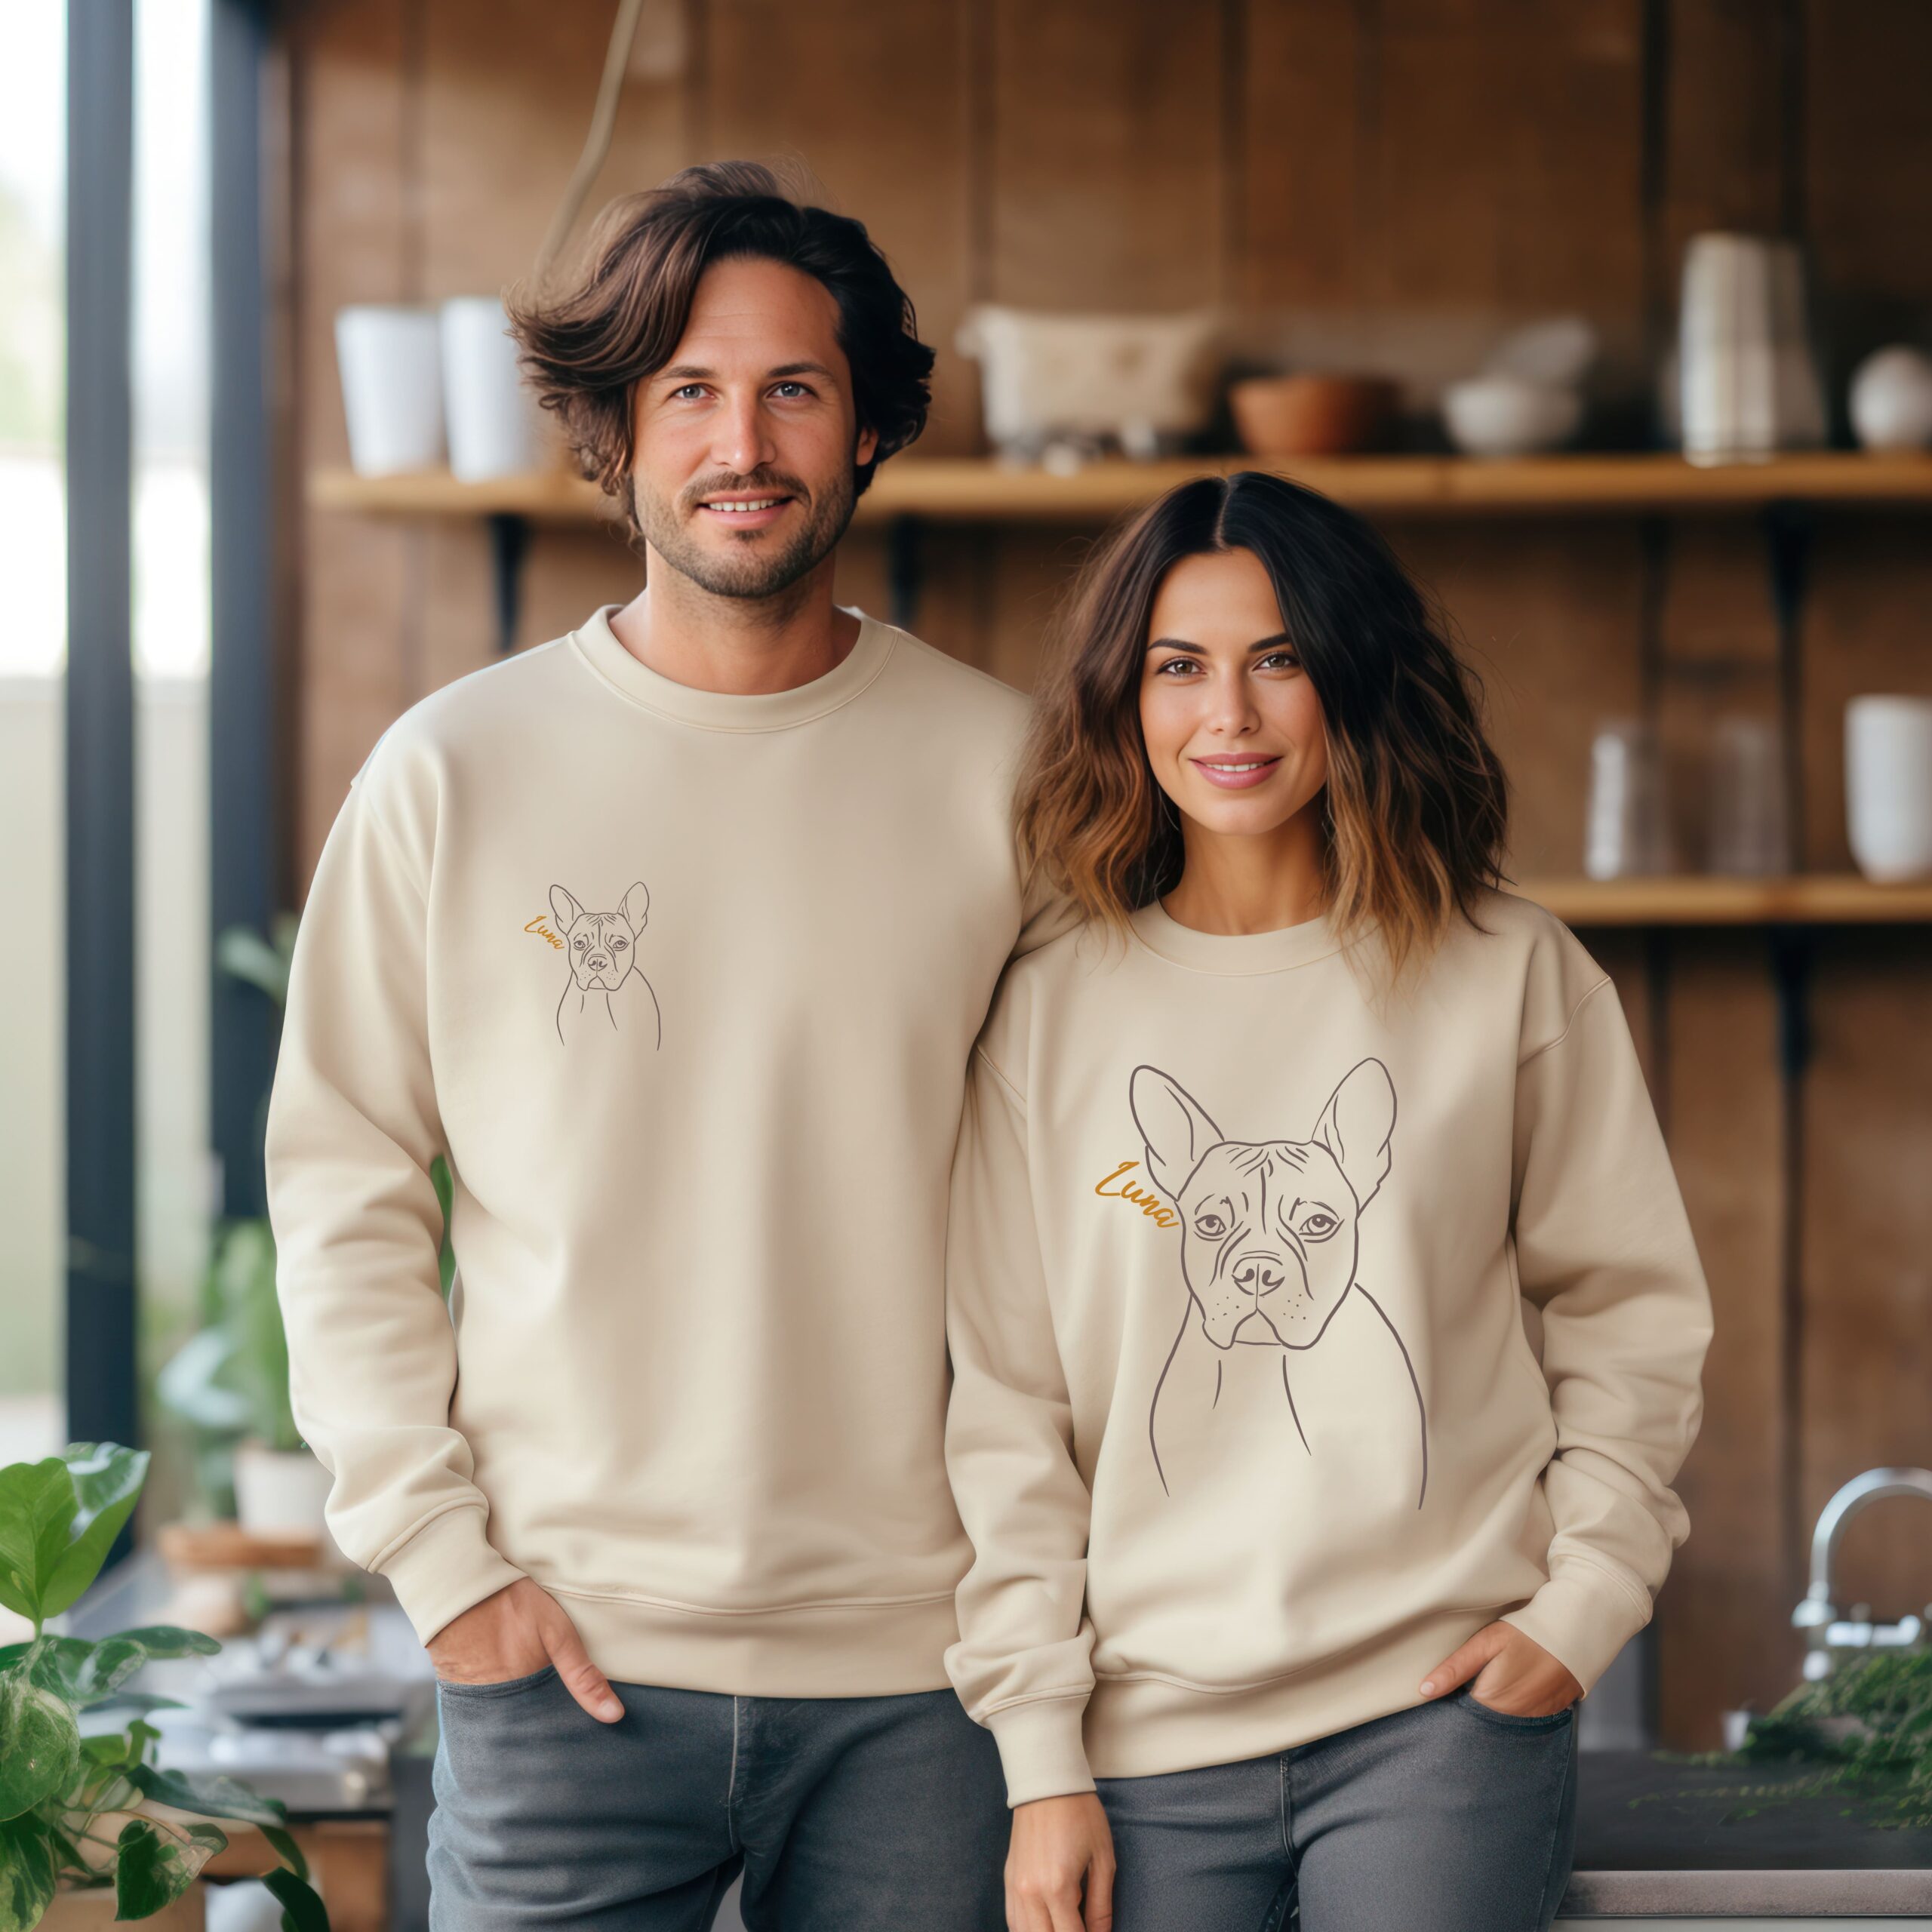 matching partner look sweatshirts with line portrait of your dog 